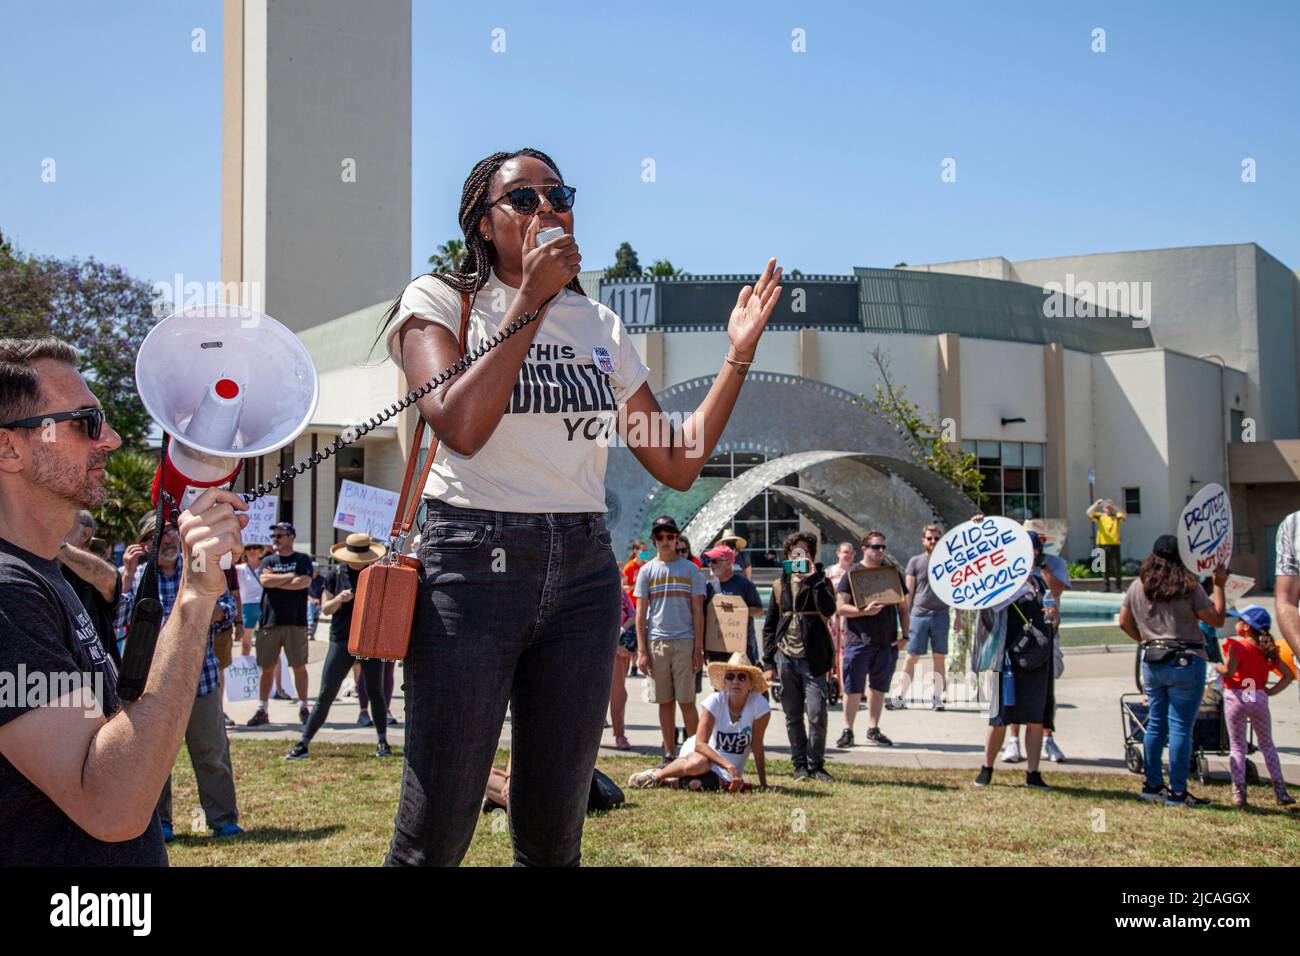 Council member Yasmine-Imani McMorrin is the first African American woman elected to the Culver City City Council. March for Life rally in Culver City June 11 2022, Los Angeles, California, USA Stock Photo